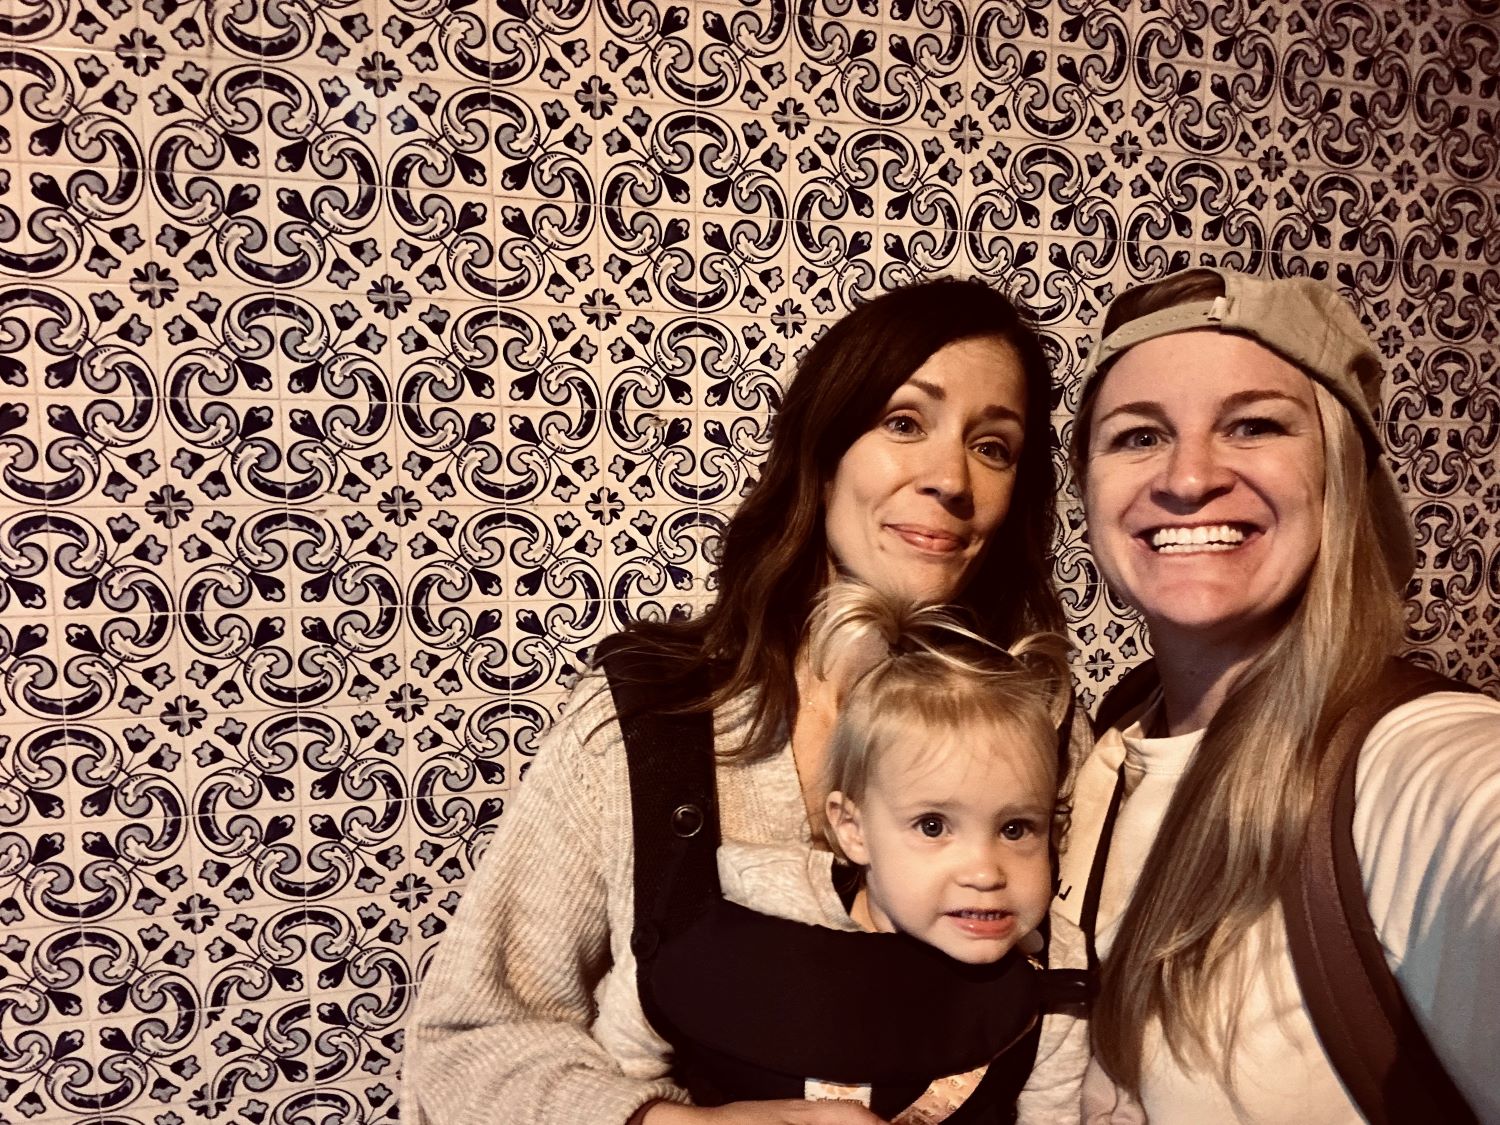 Nicole with wife and daughter